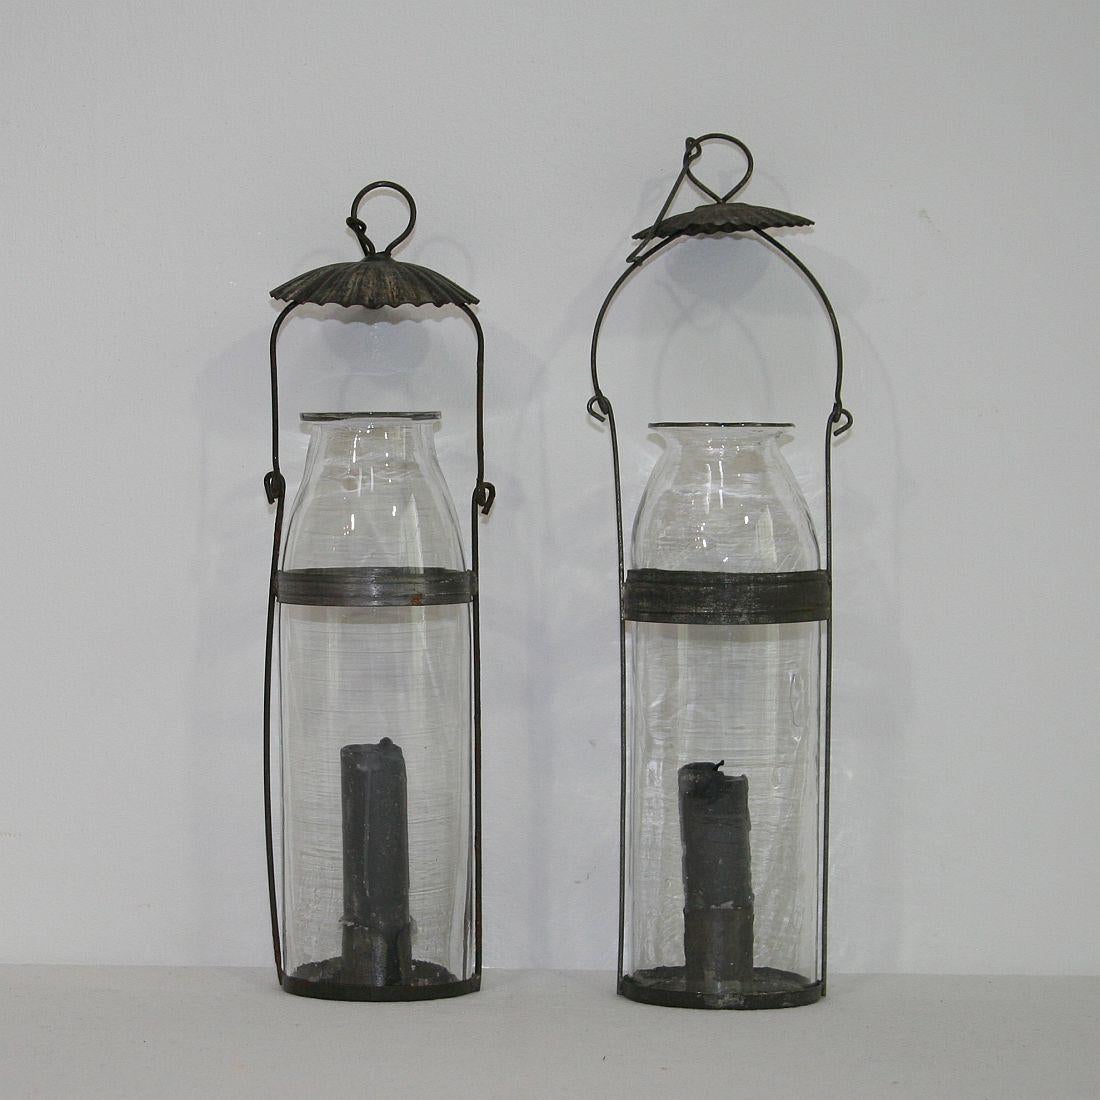 Beautiful couple of rare glass lanterns. Lyon, France, circa 1900, in good but weathered condition.